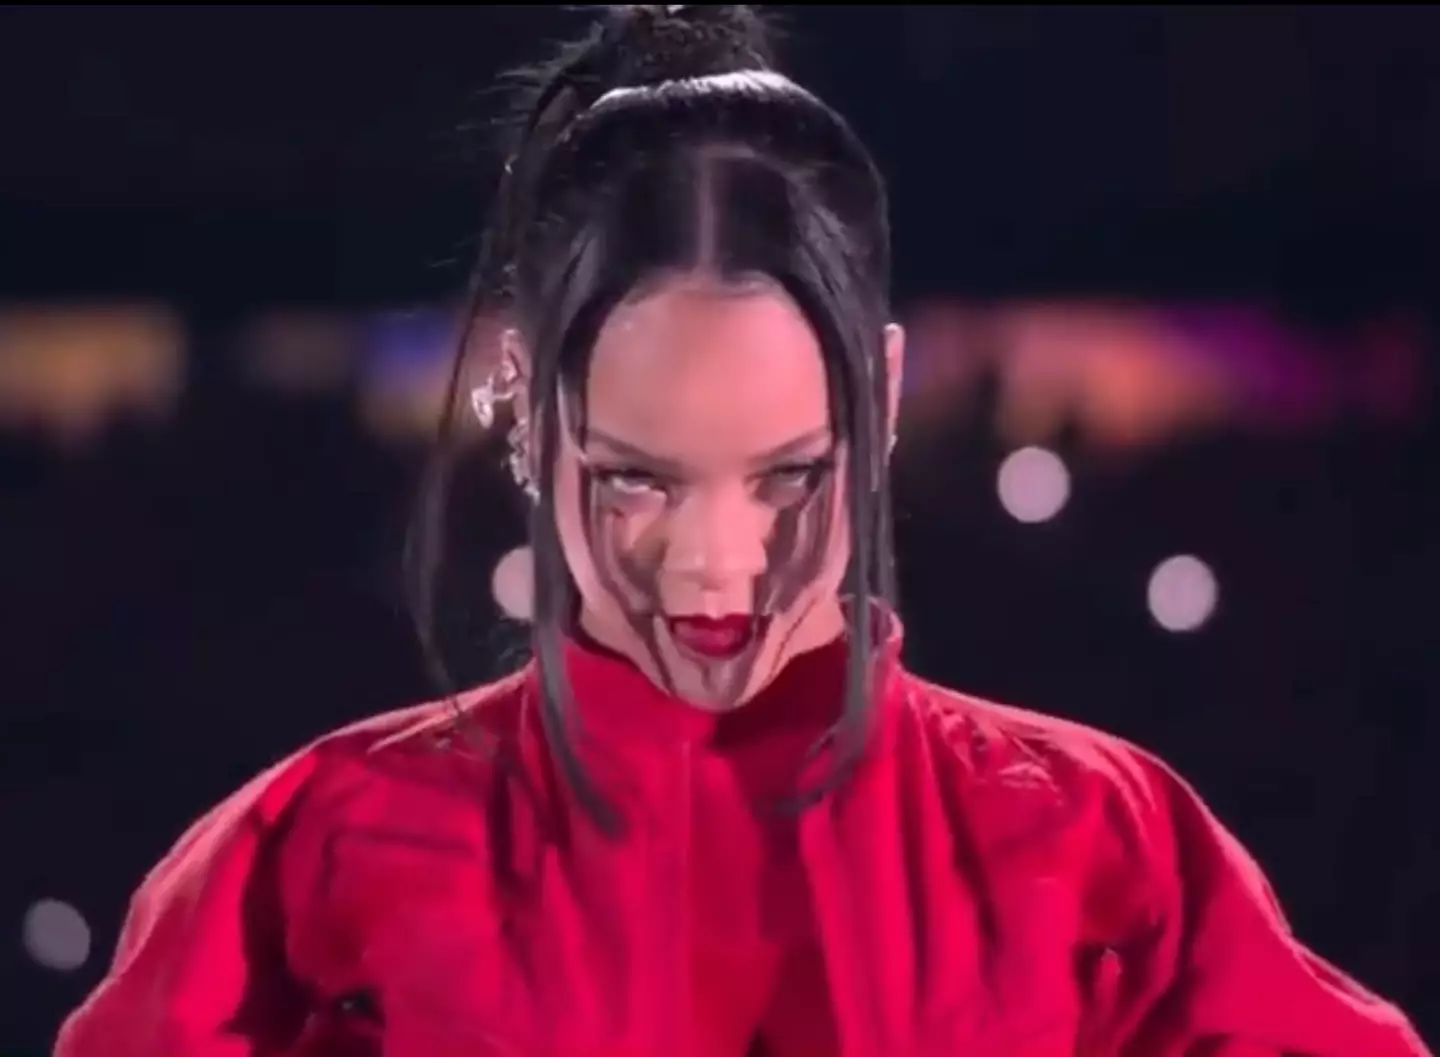 Rihanna wowed viewers with her stunning performance.